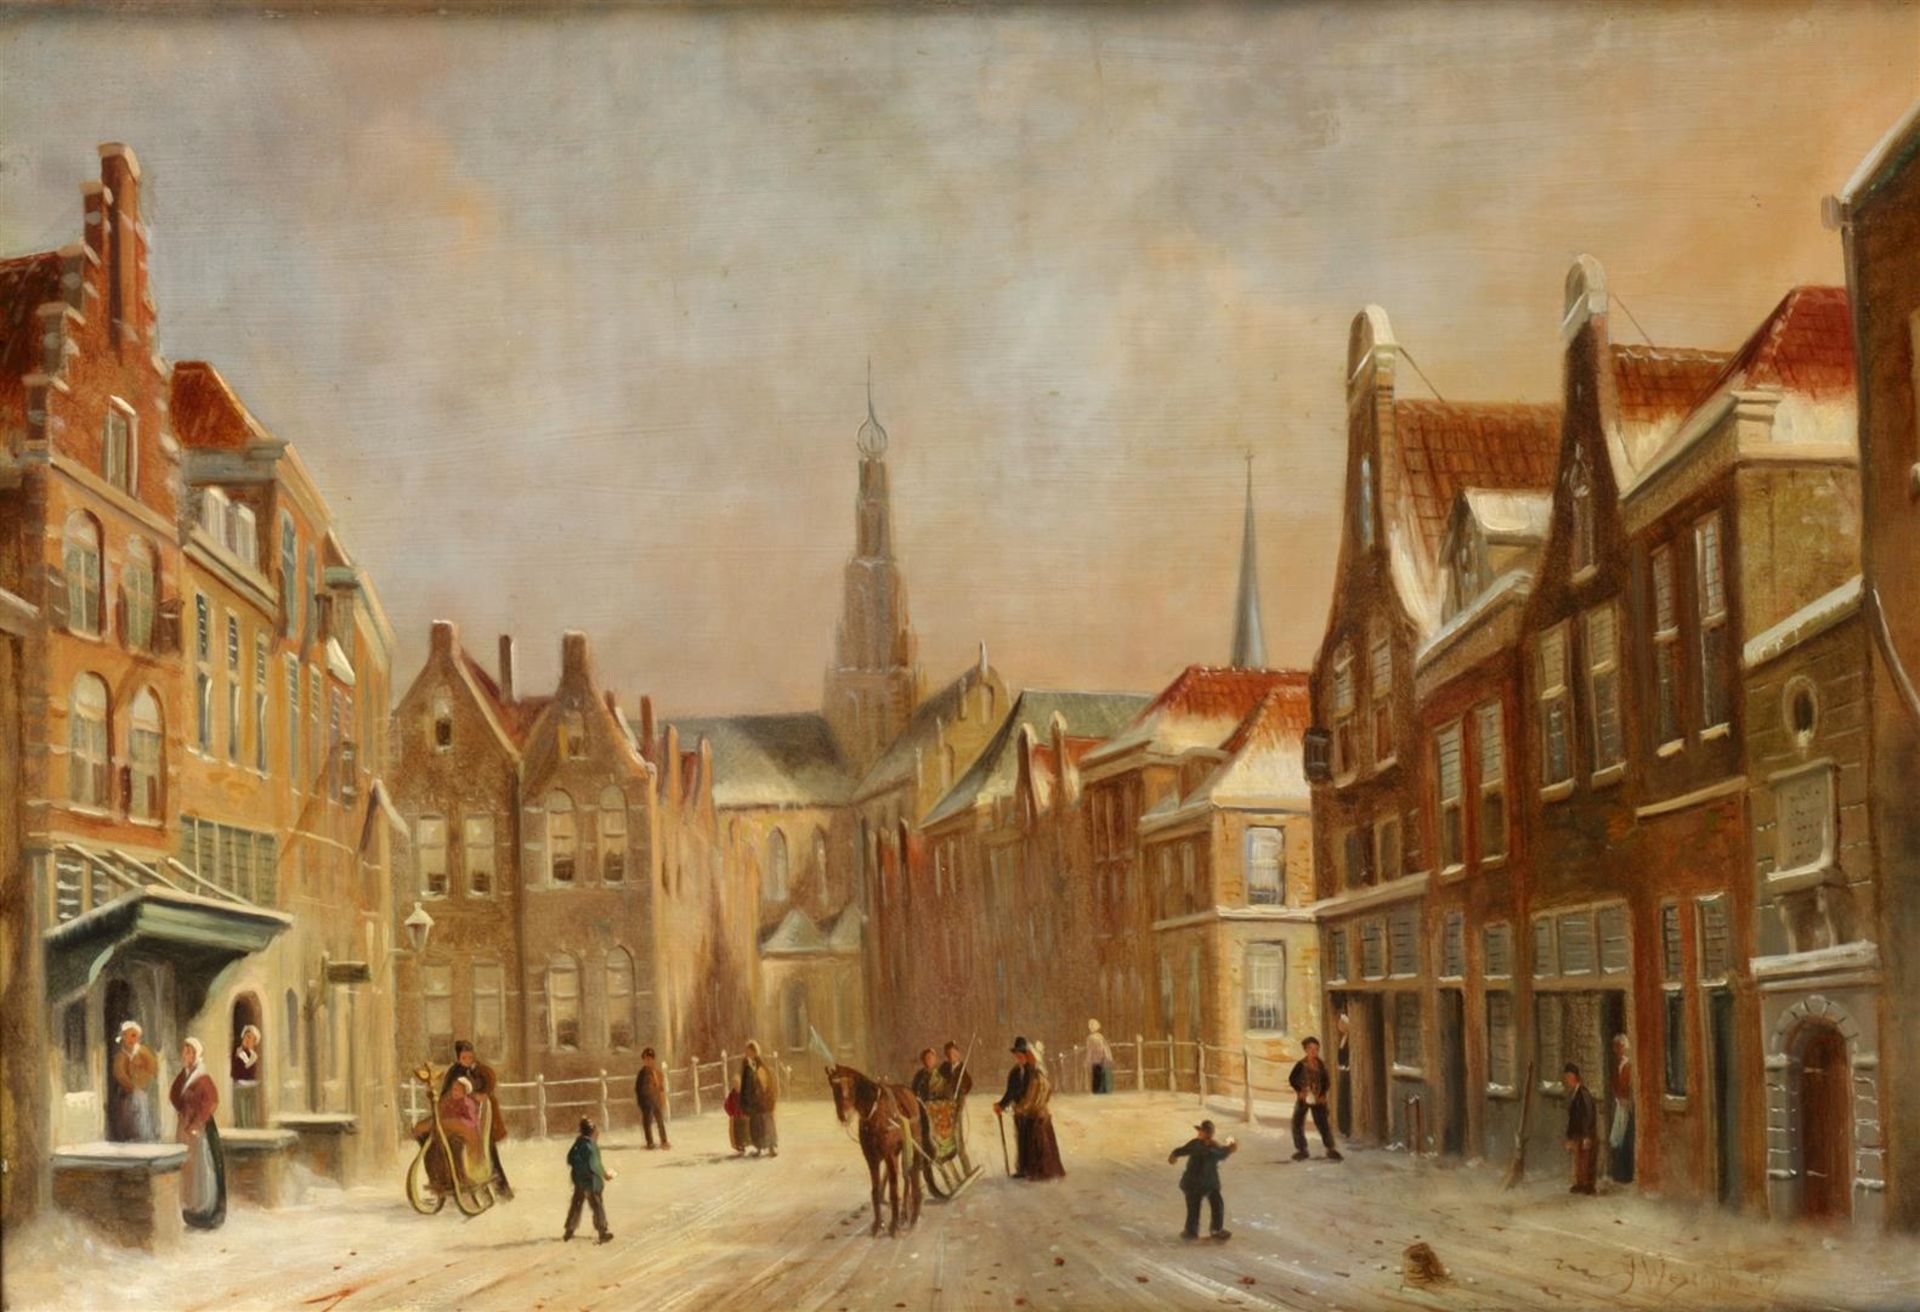 After P.G. Vertin, View of Haarlem in Winter.